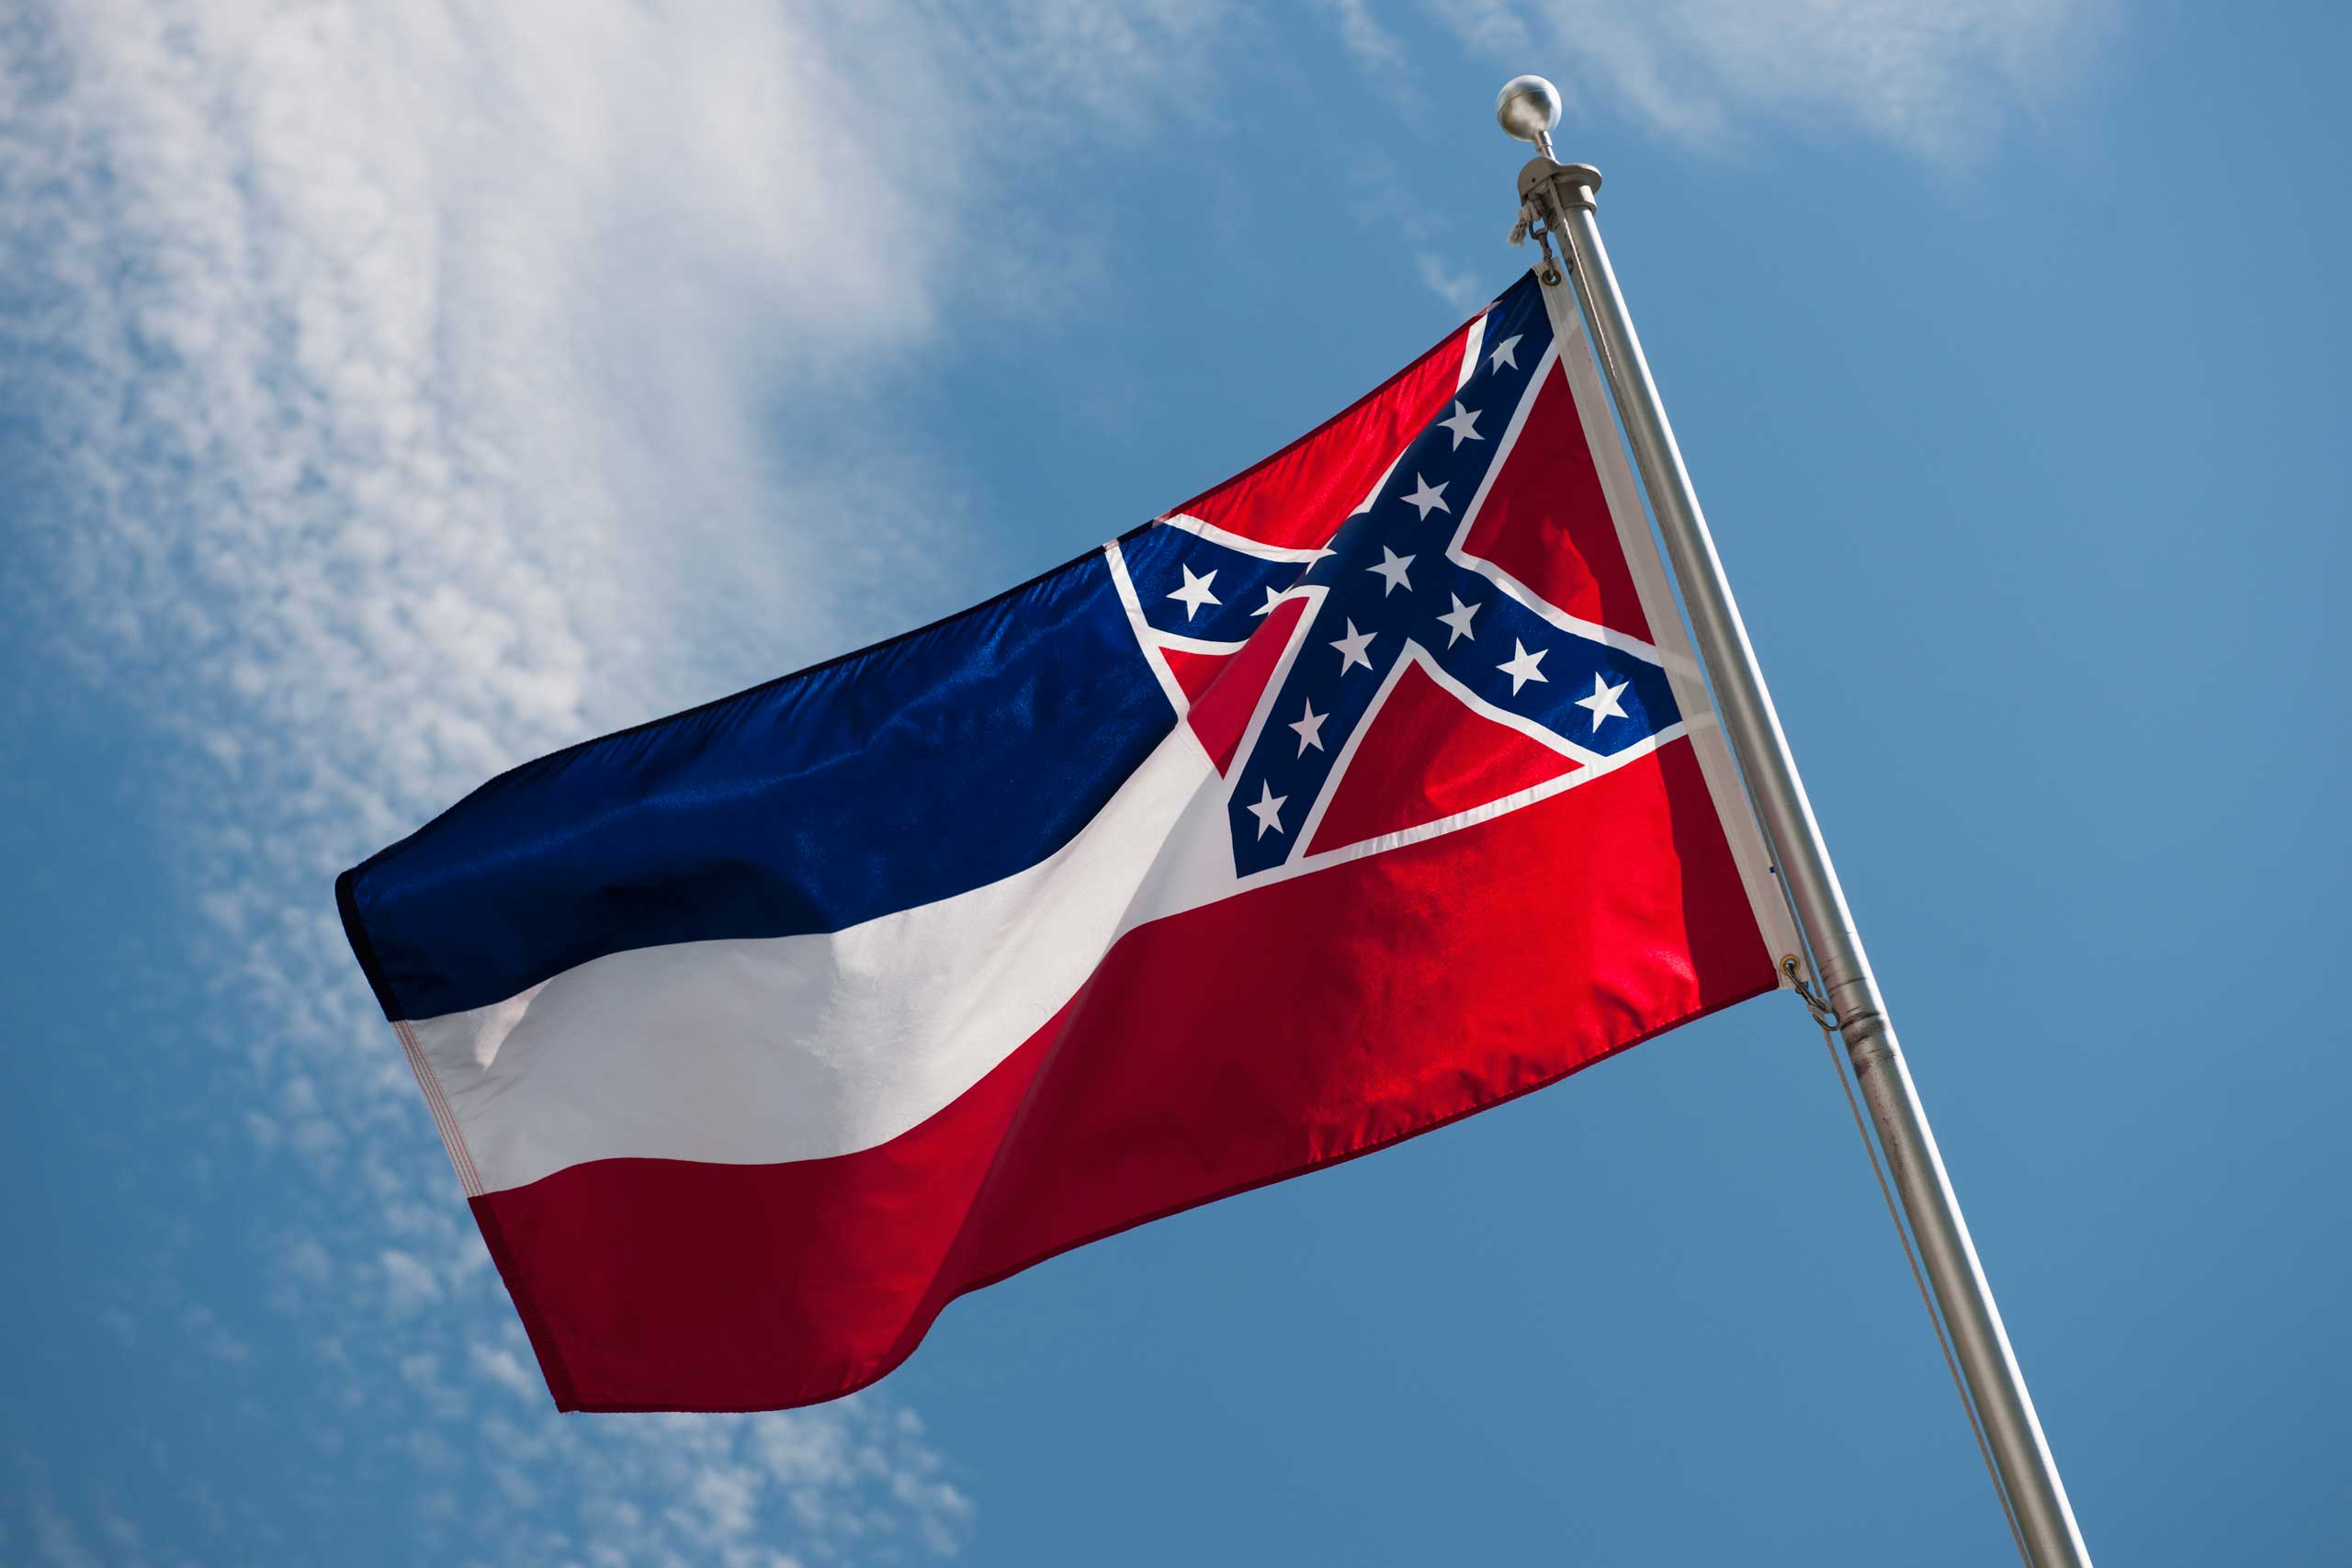 Mississippi State flag. (Getty Images)